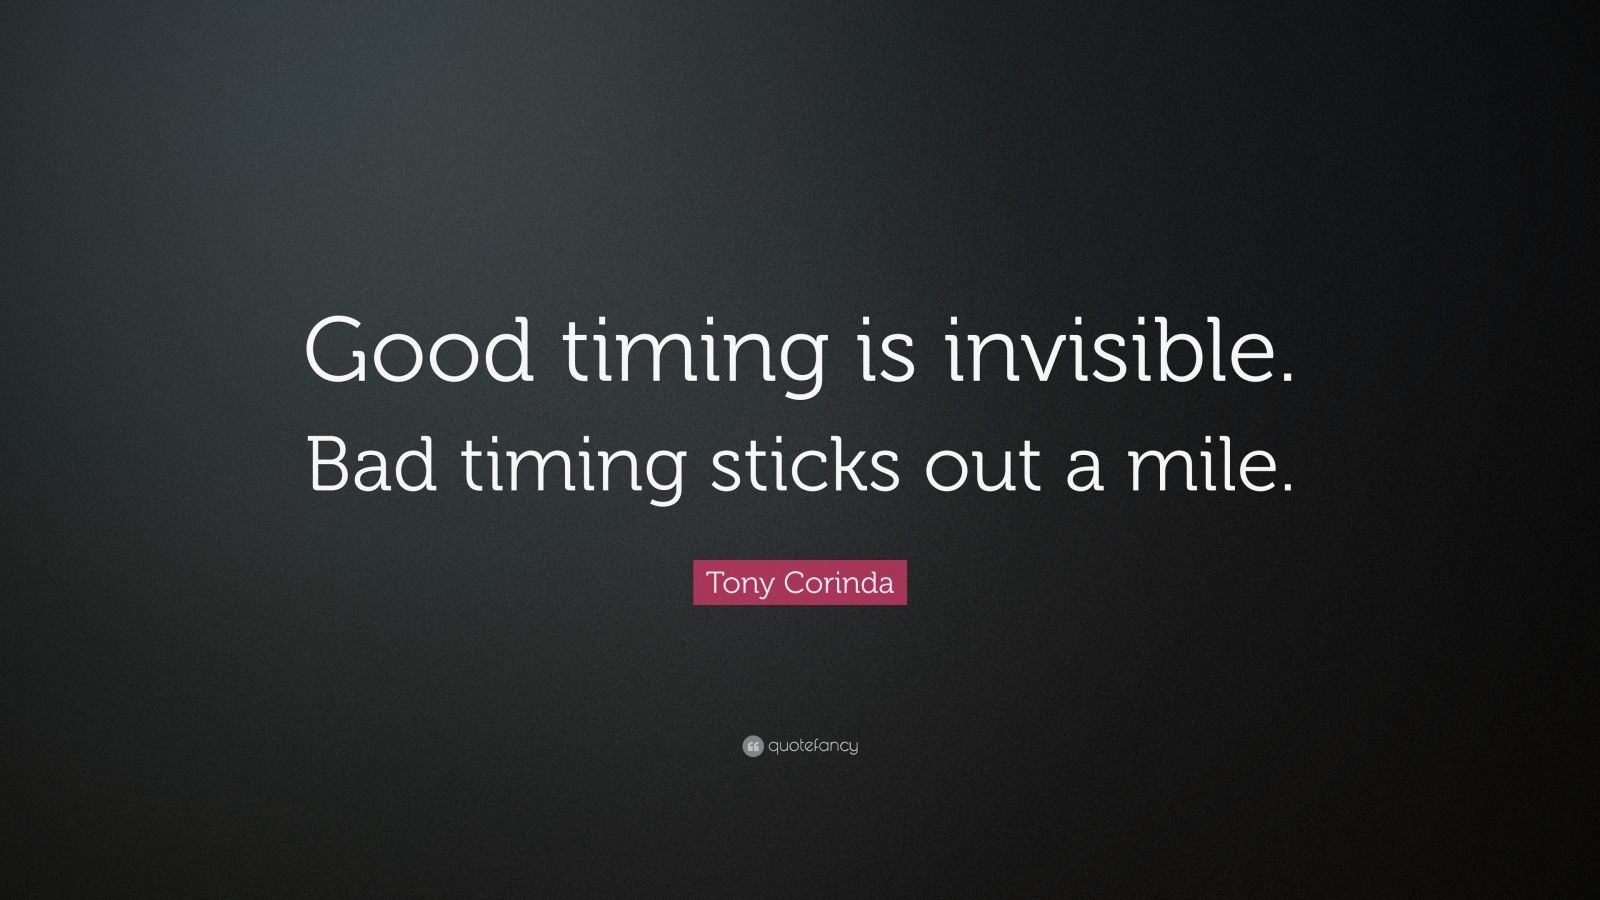 Tony Corinda Quote: “Good timing is invisible. Bad timing sticks out a mile.”